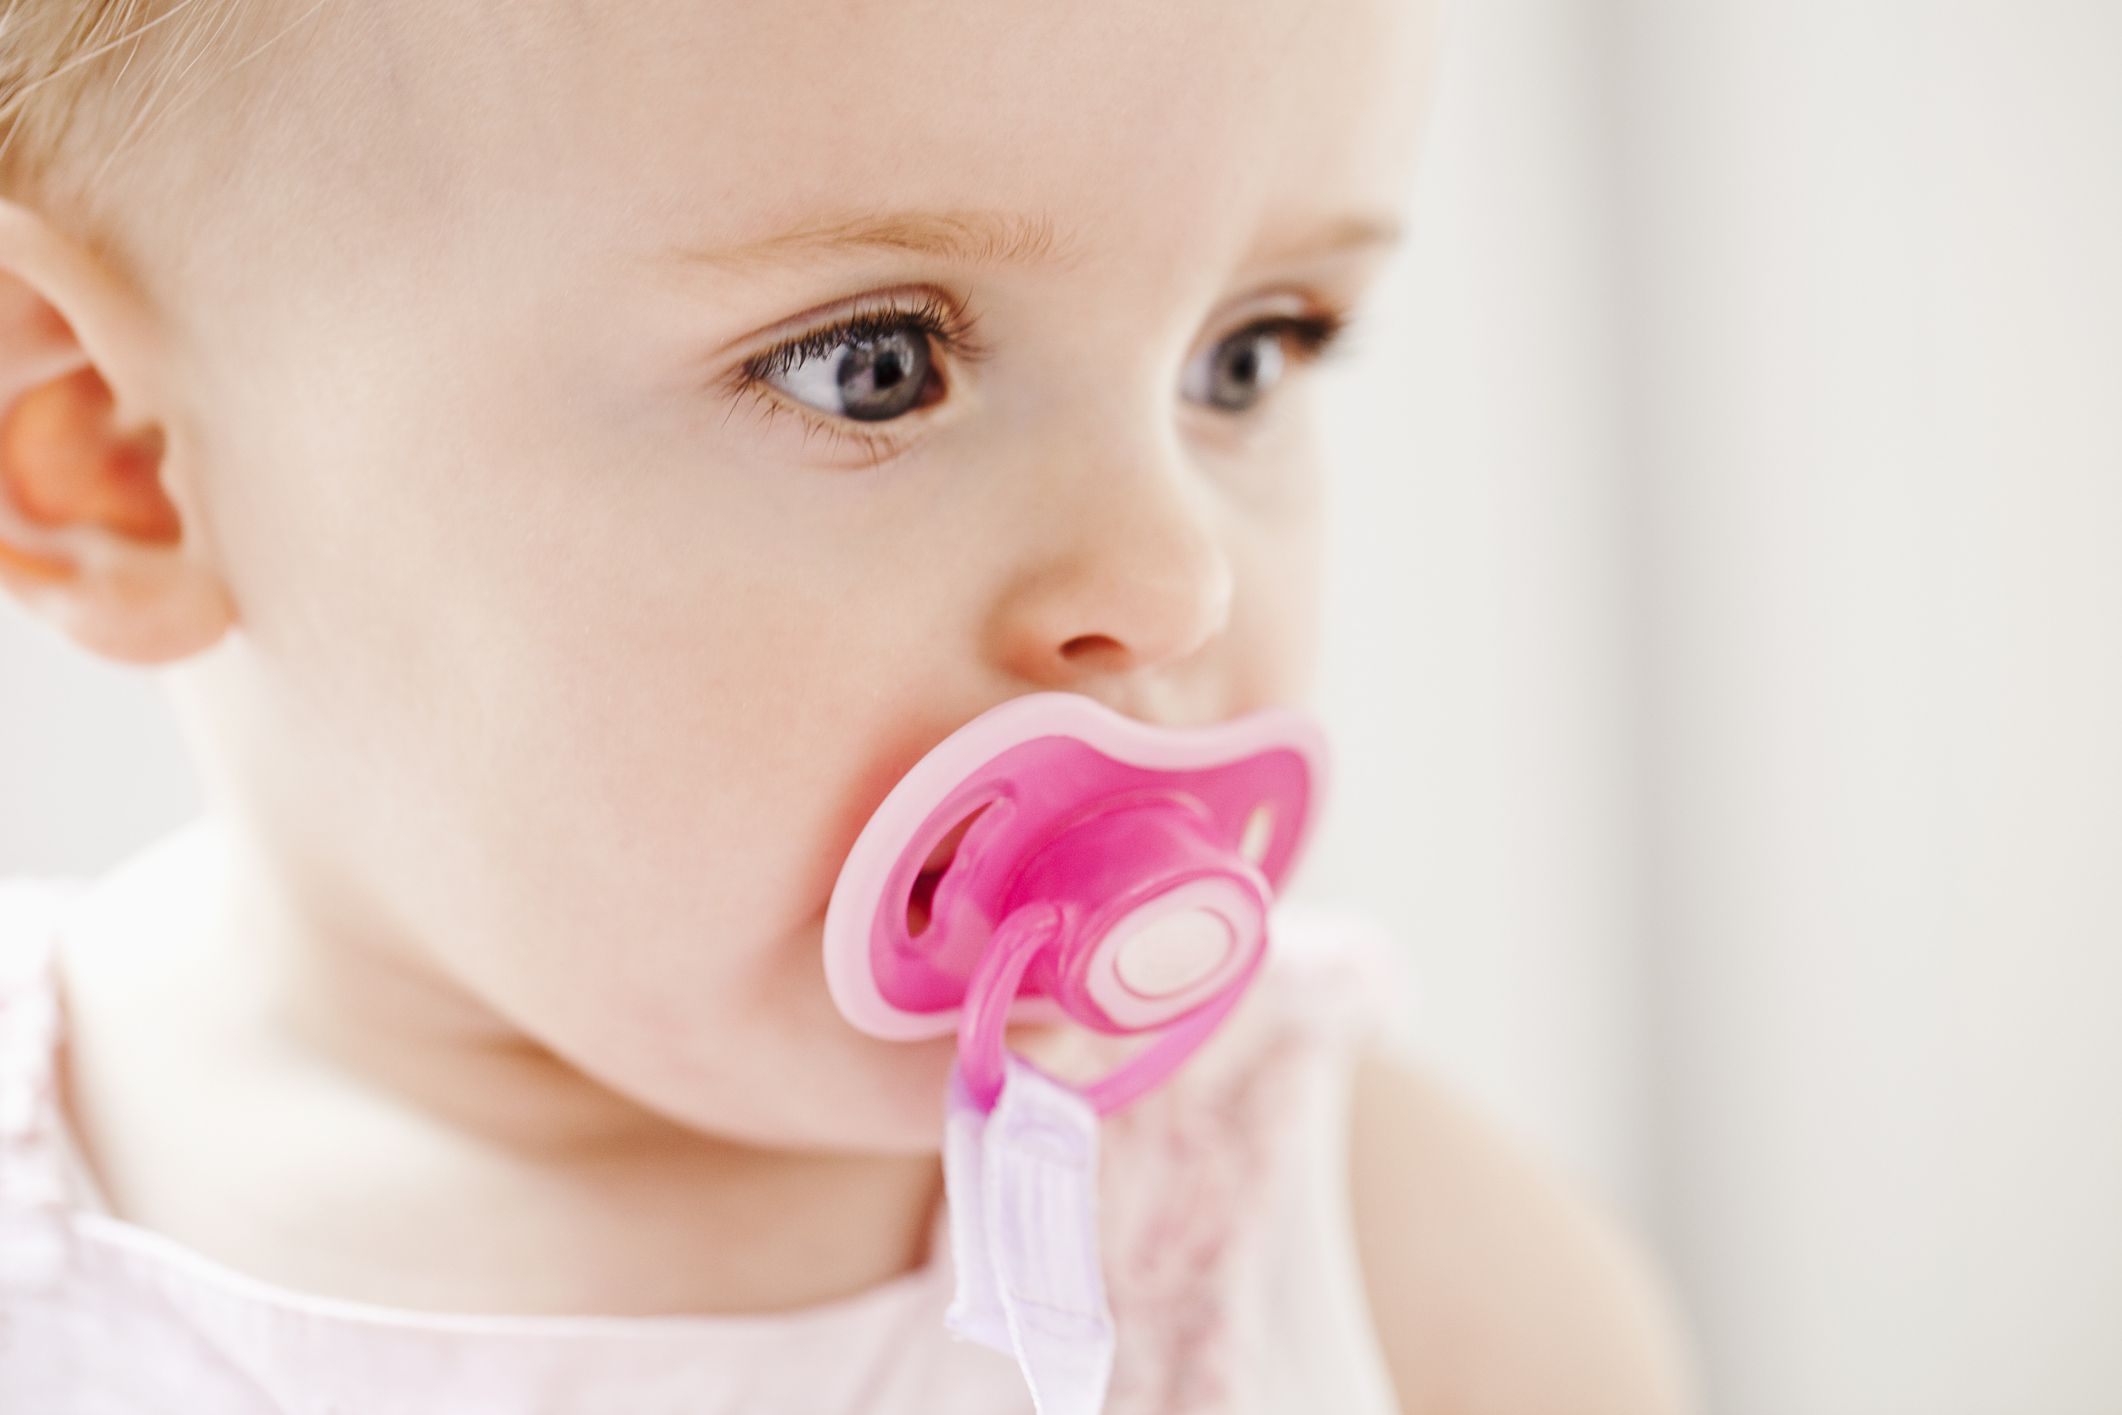 Should You Give Your Breastfed Baby a Pacifier?